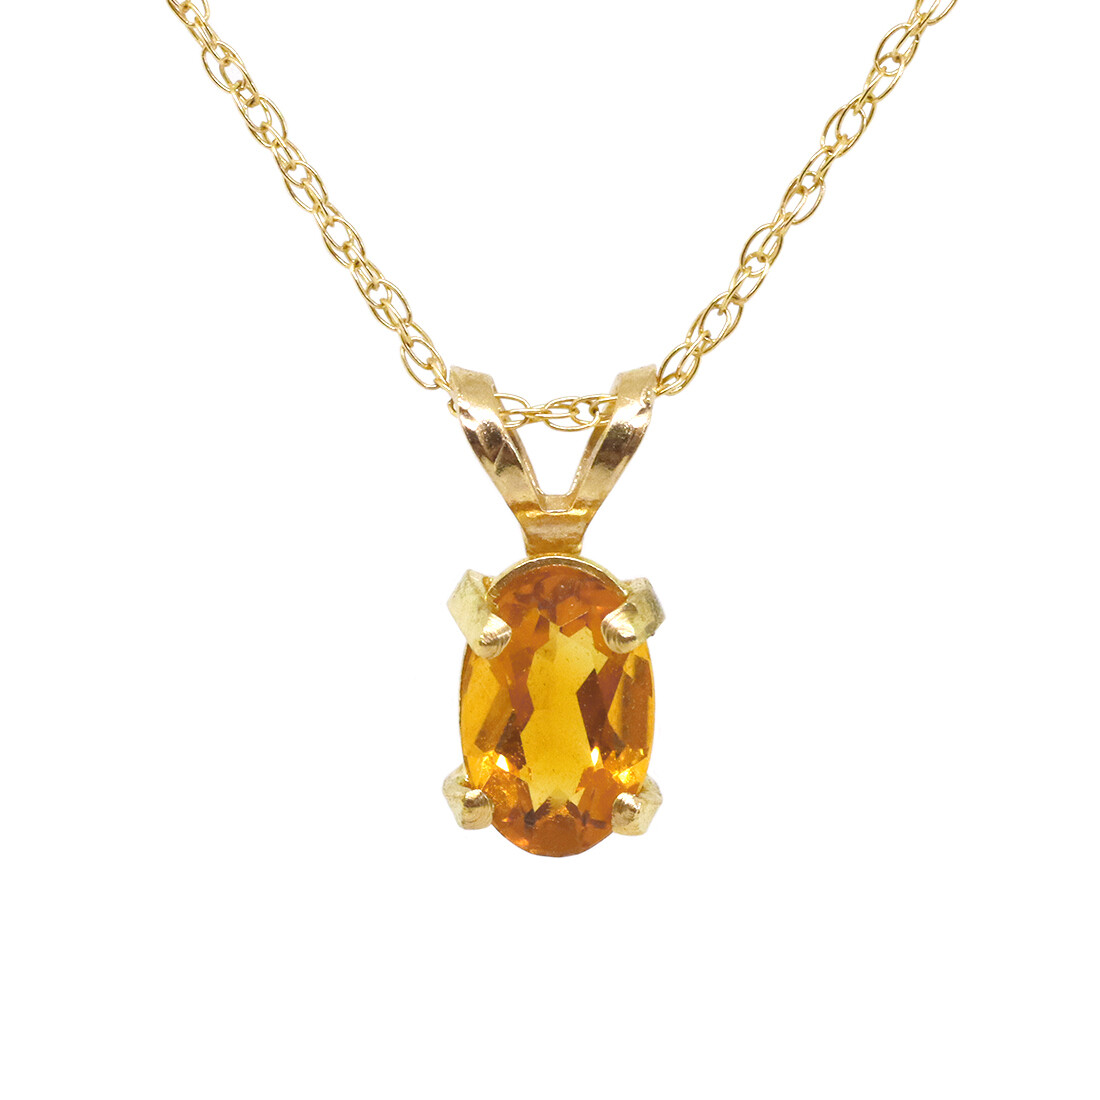 14KT Yellow Gold Oval Citrine Necklace